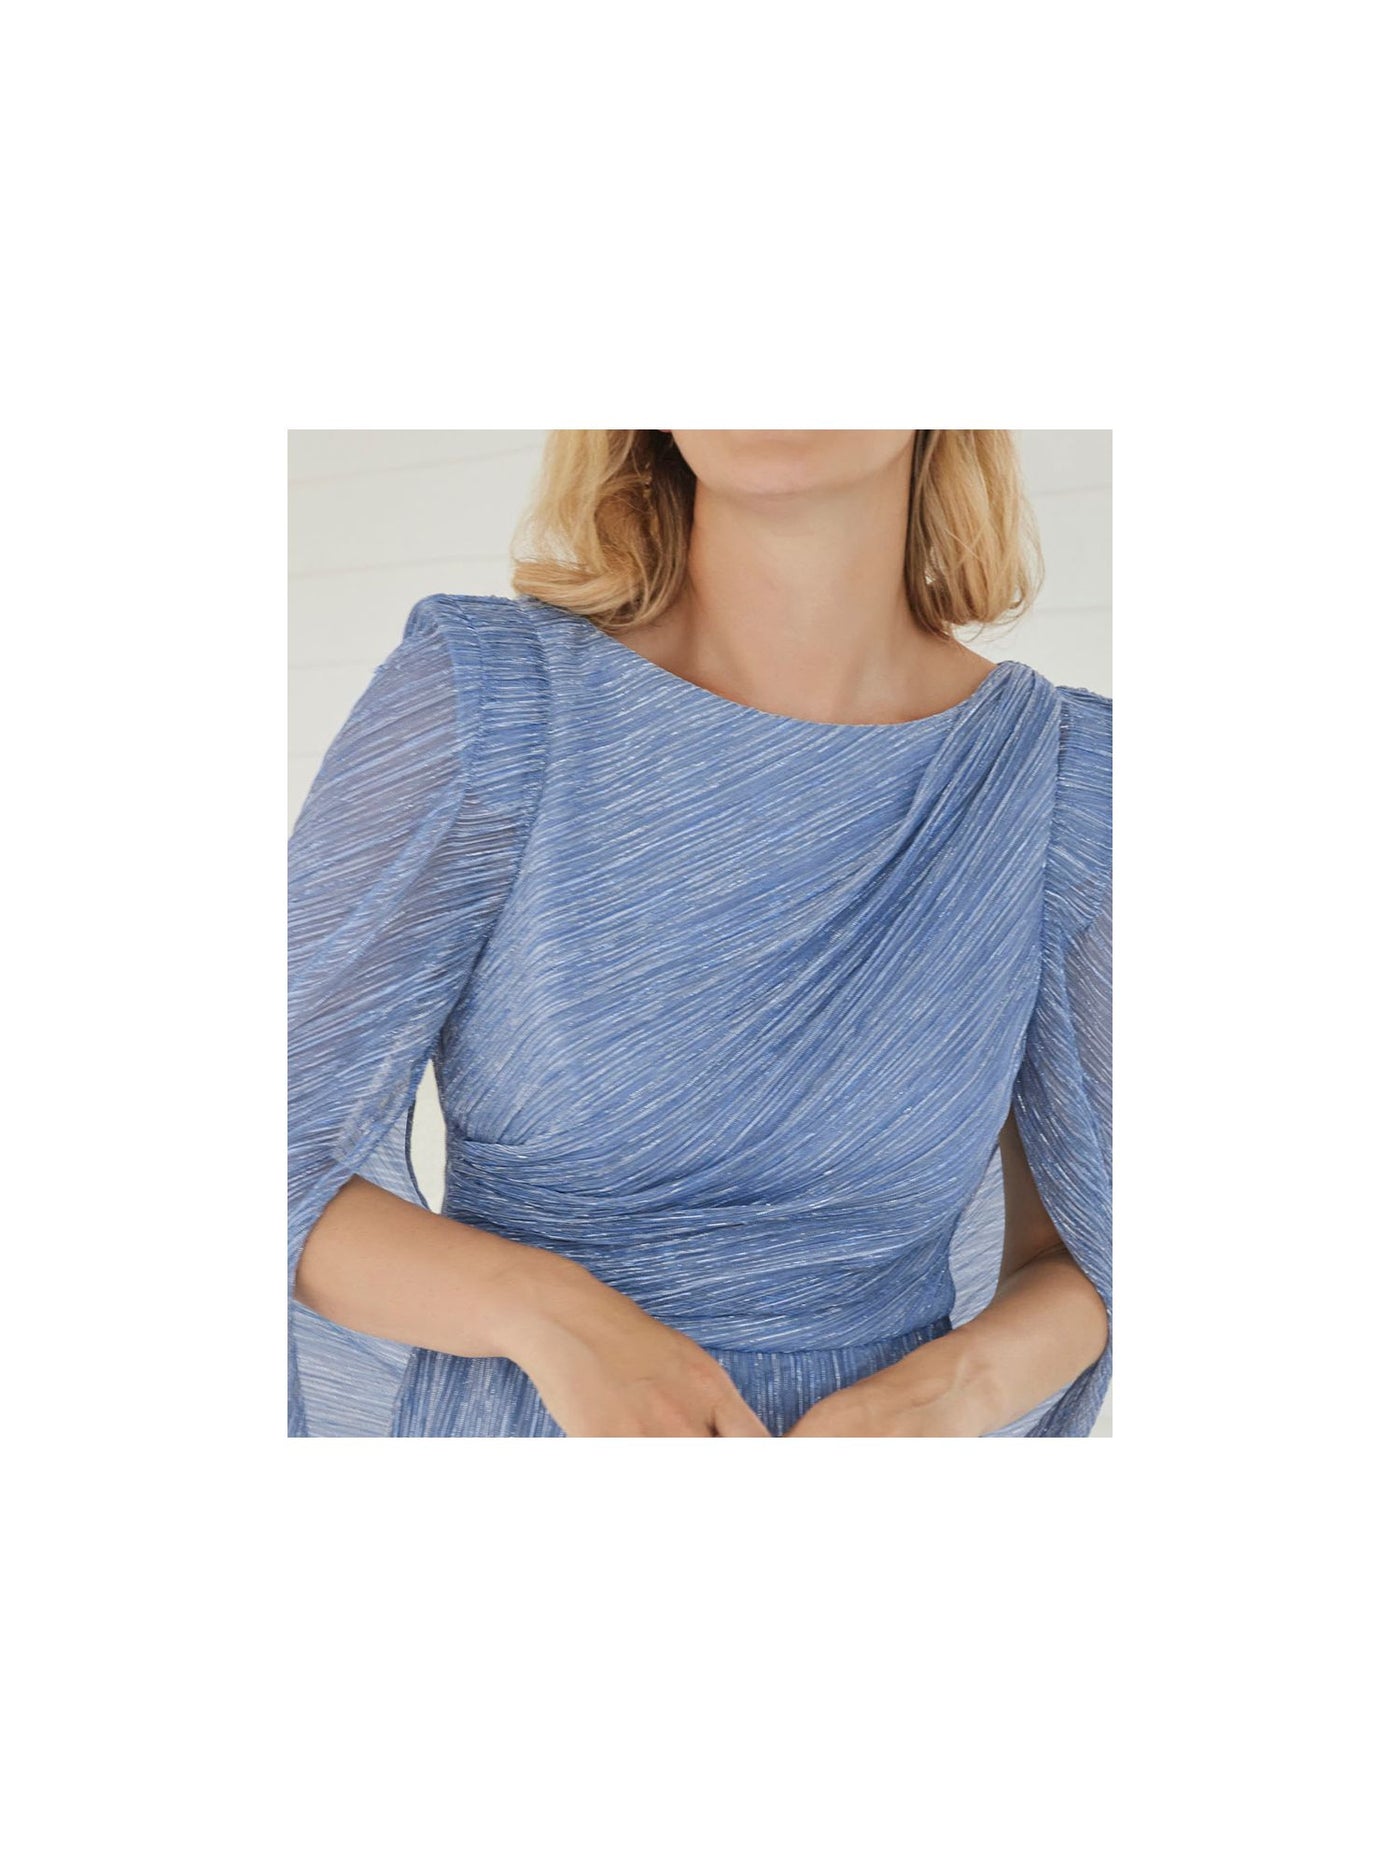 ADRIANNA PAPELL Womens Blue Metallic Cape Striped Elbow Sleeve Boat Neck Wear To Work Top 14